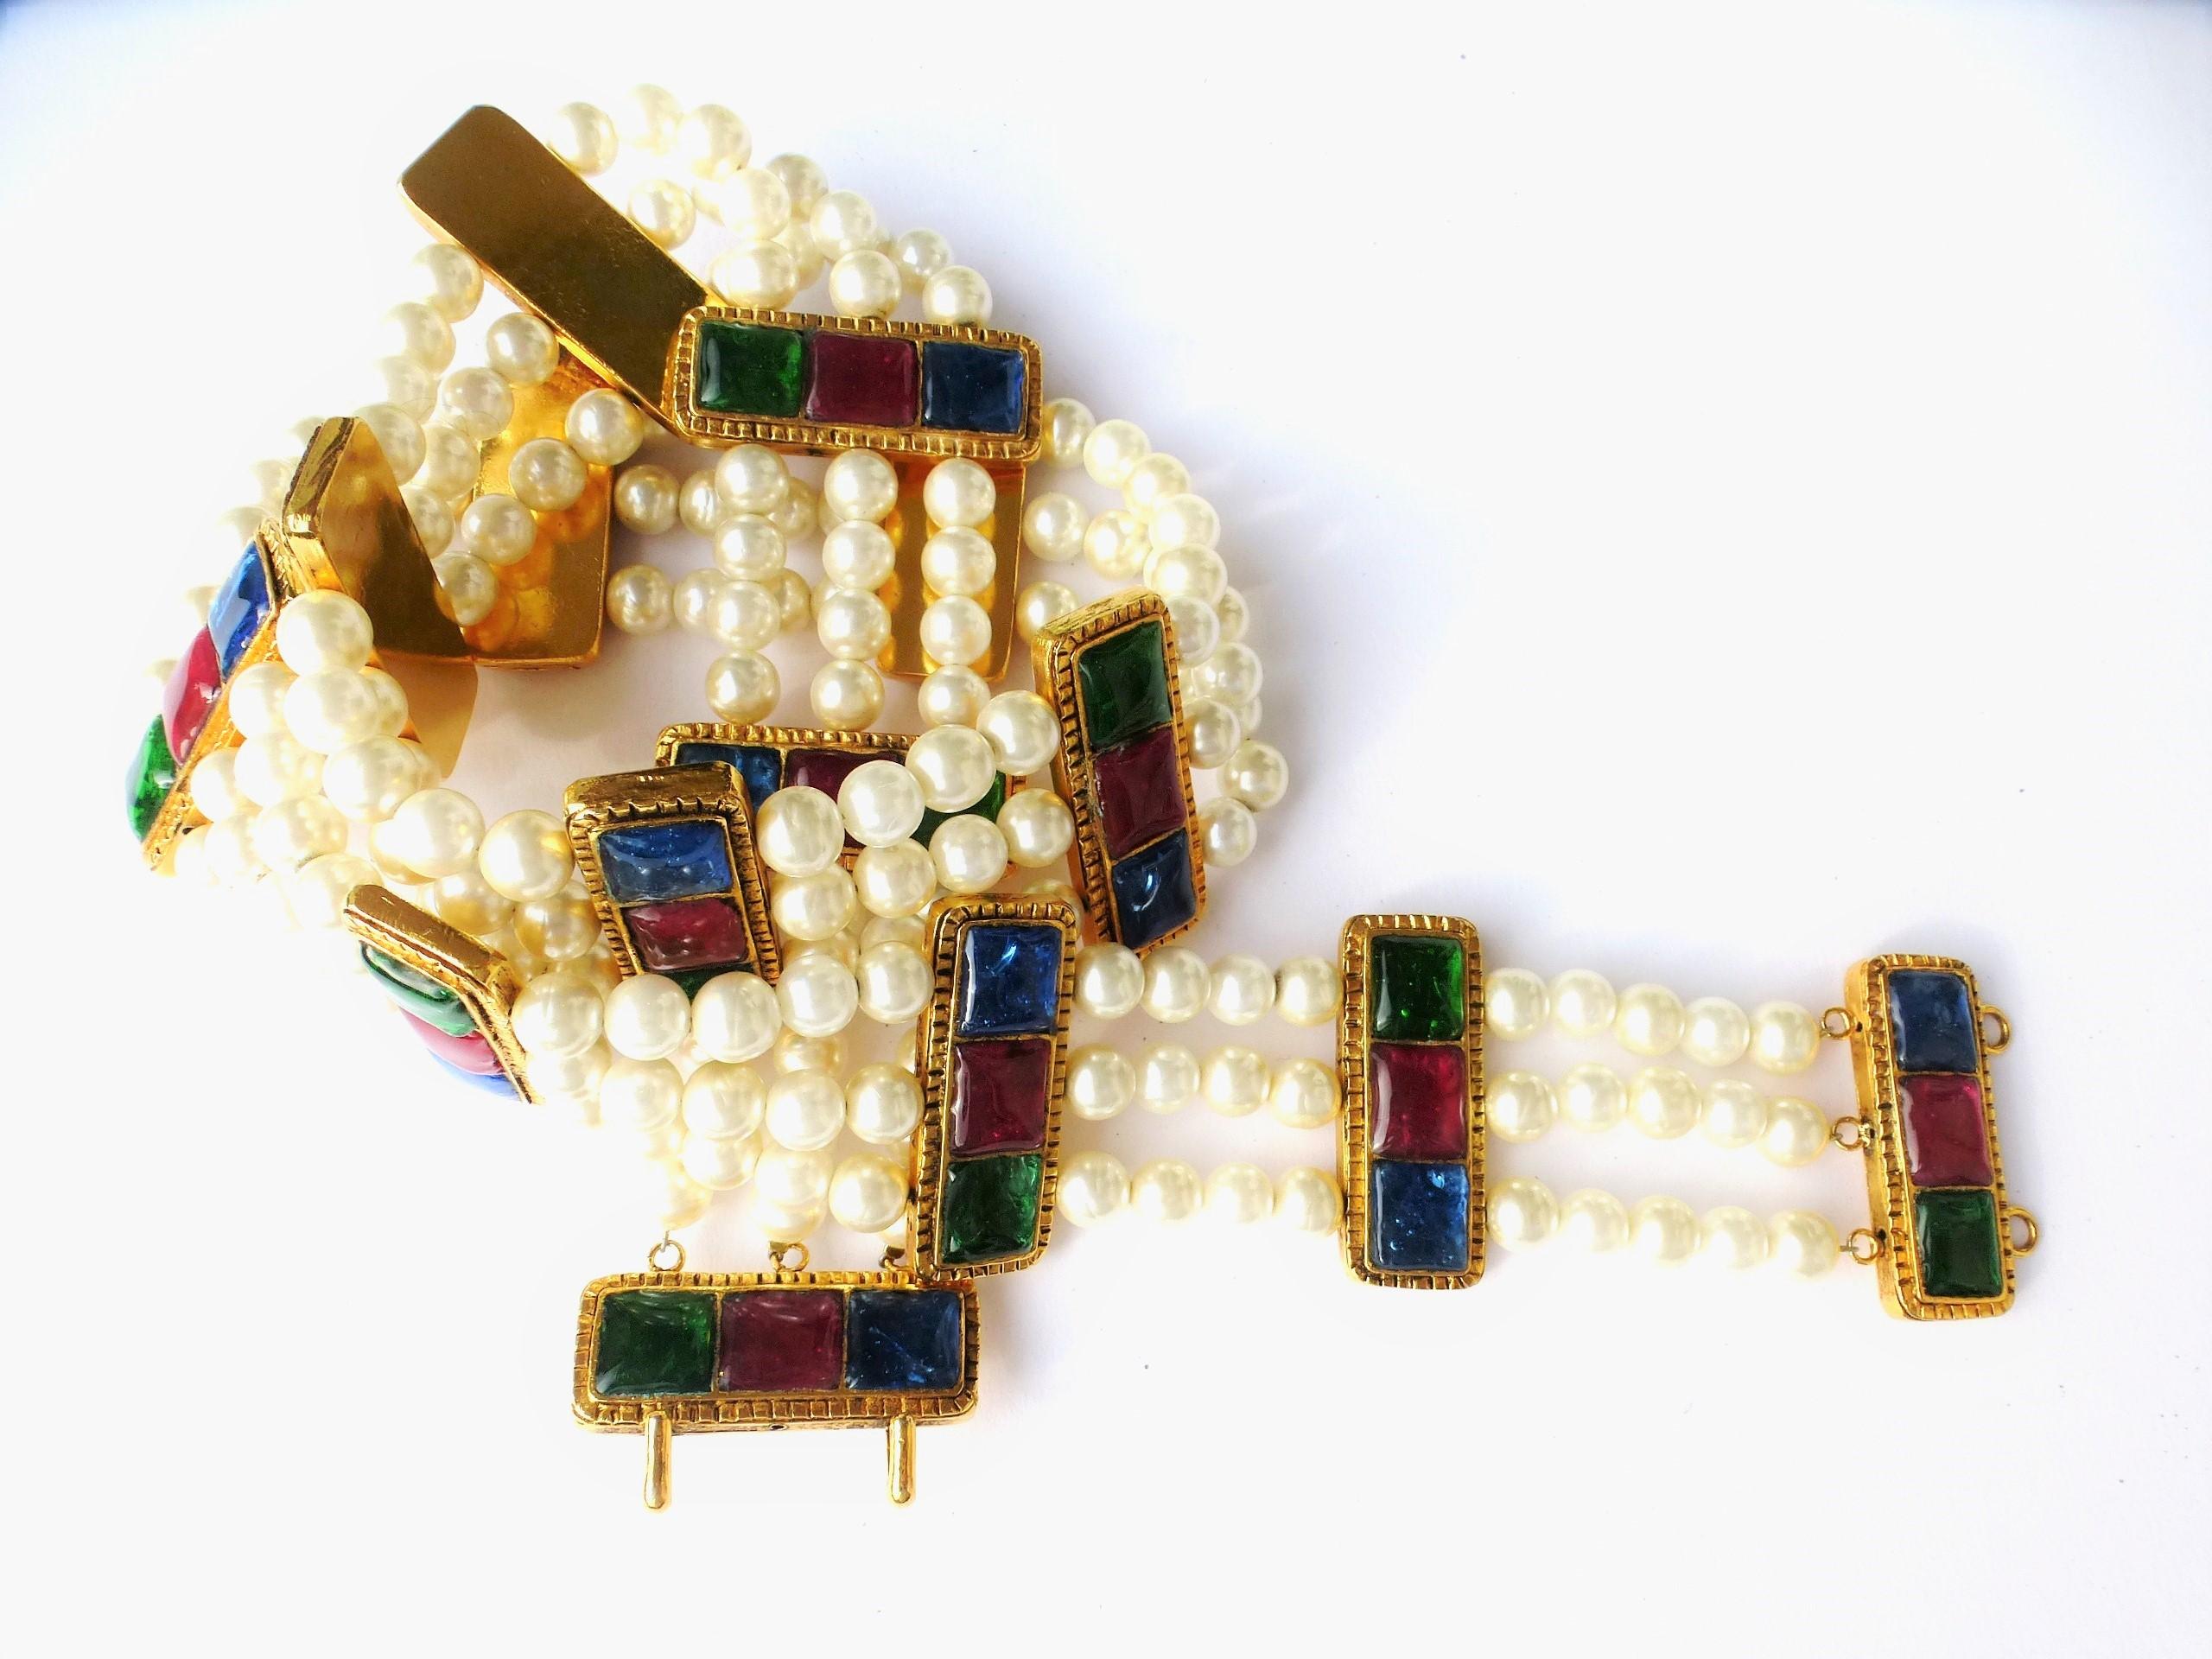 A very unusual Chanel belt with many faux pearls and spaces made by Robert Goossens with colored liquid glass from the House of Gripoix.
It is a unique, perfectly preserved, from the first Victoire de Castellane collection in 1985. It is signed with